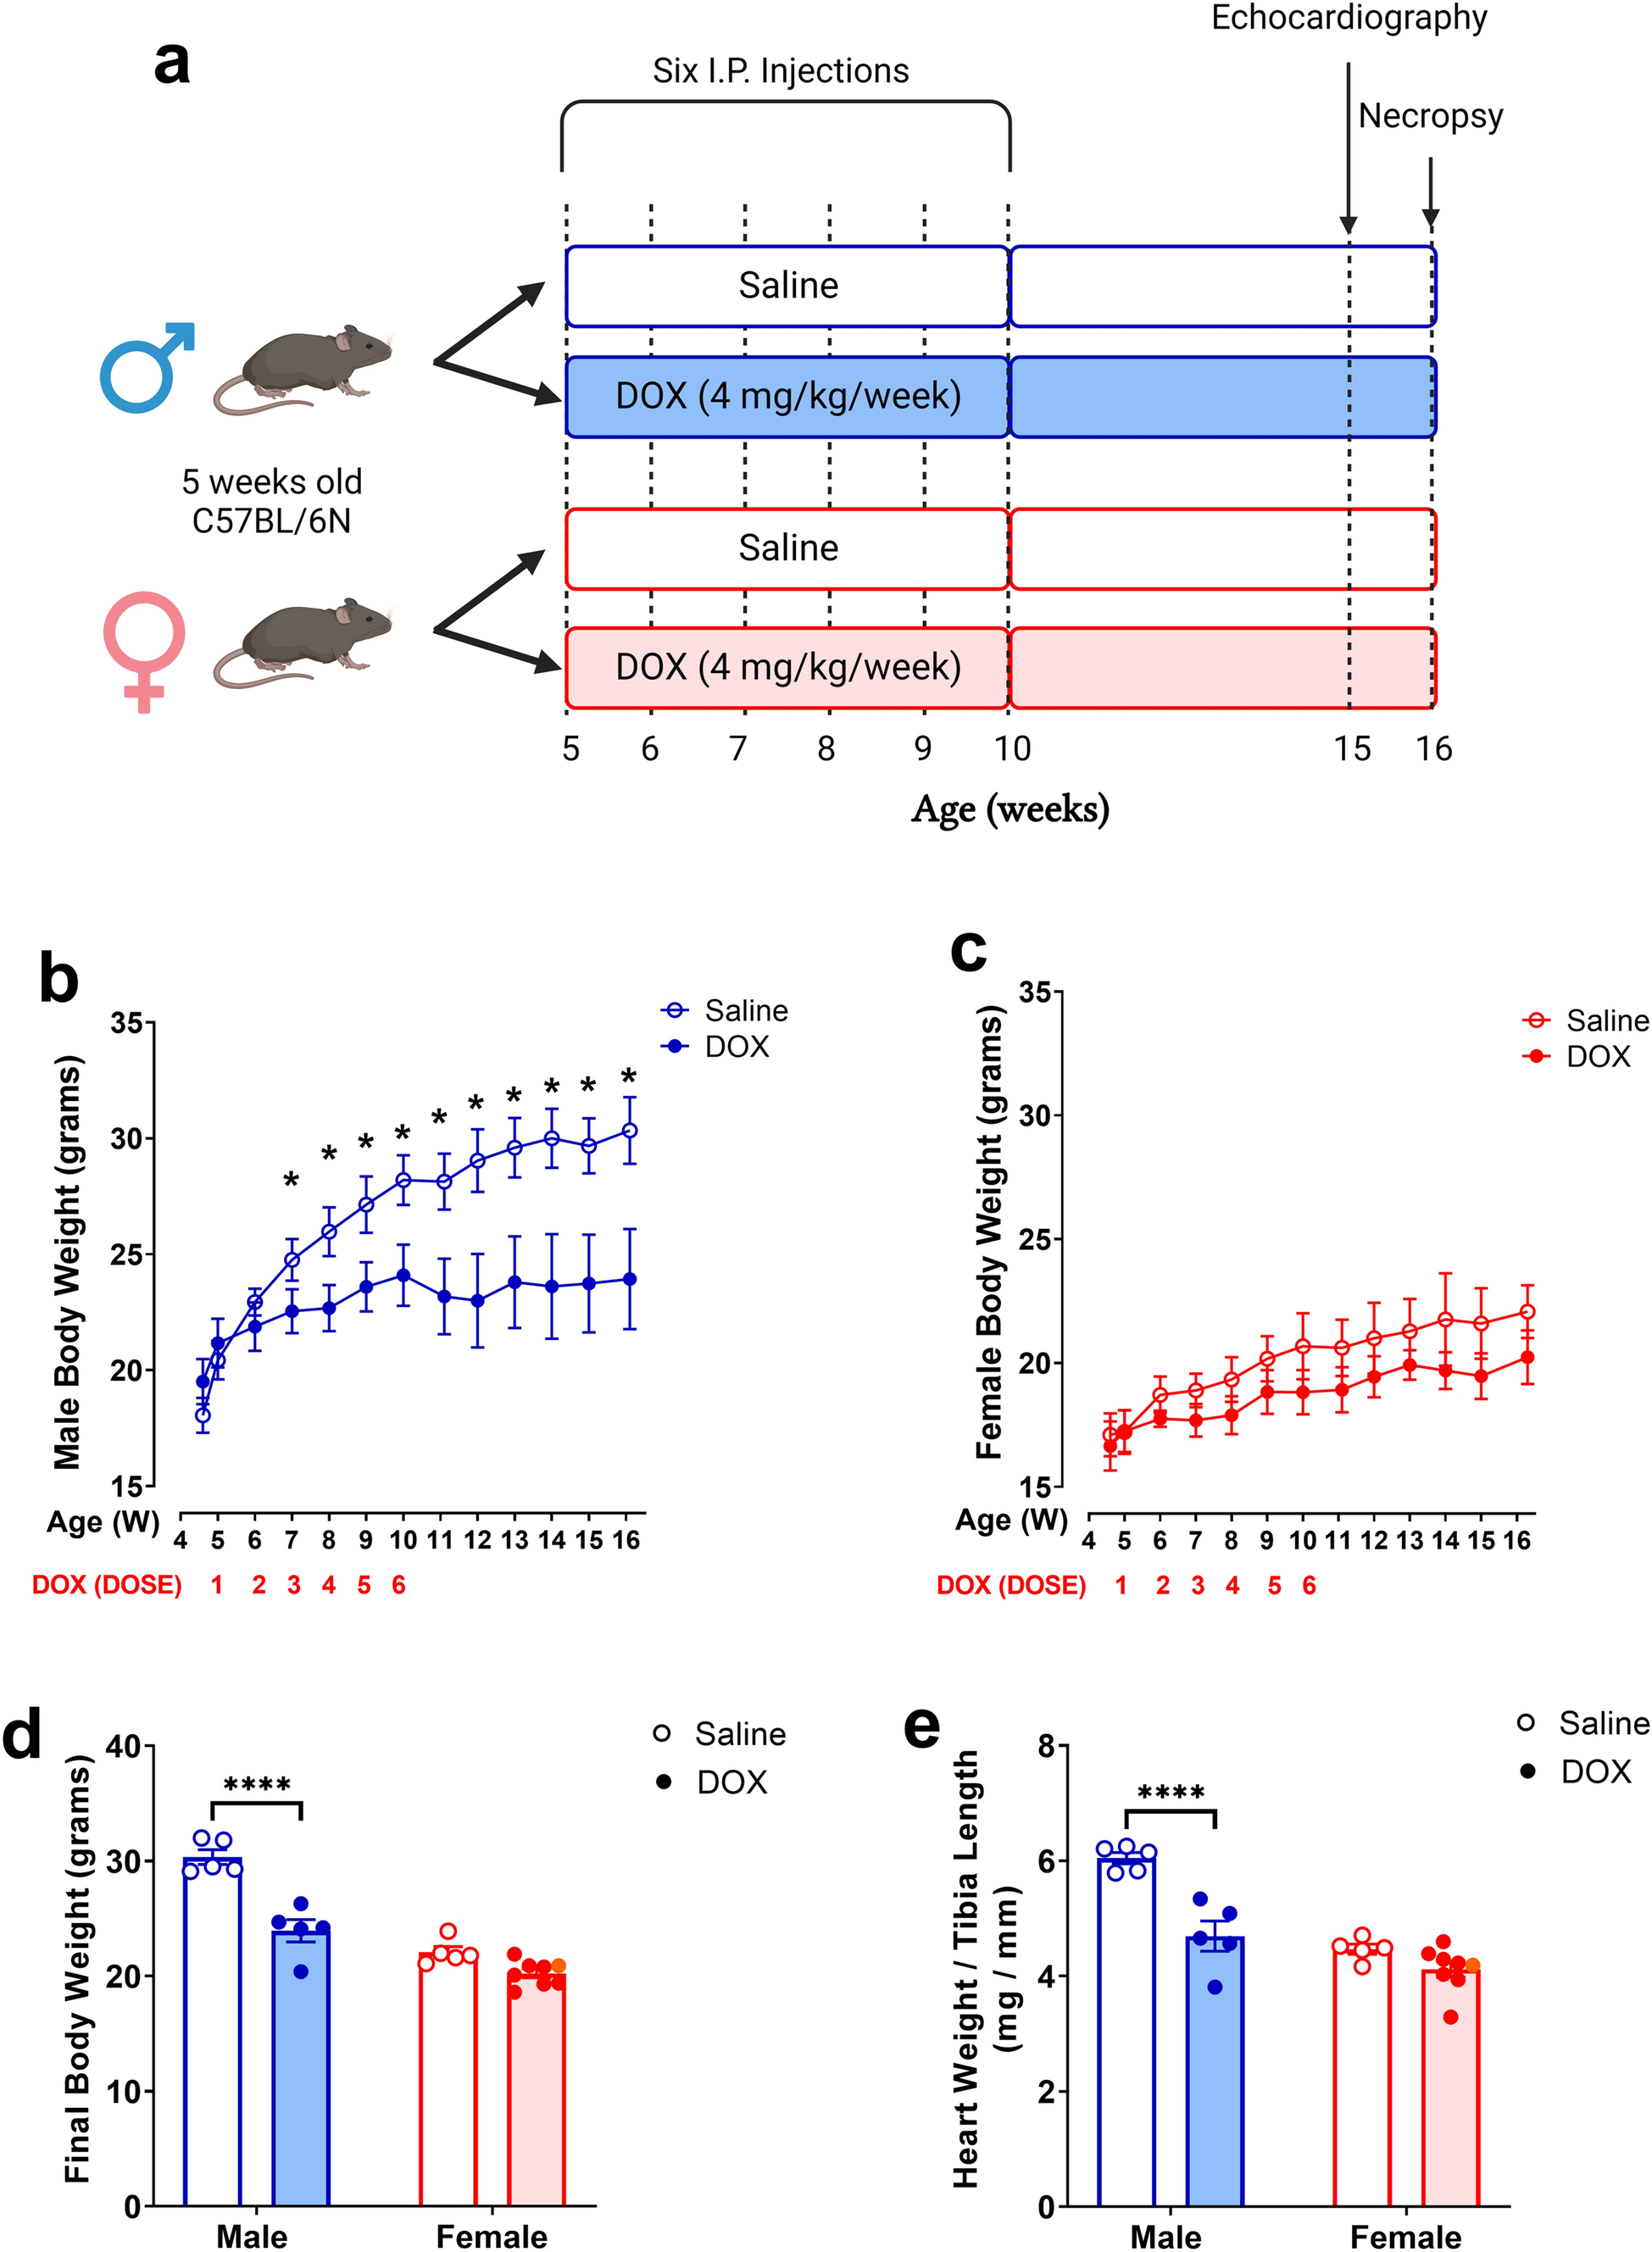 Sex-related differences in delayed doxorubicin-induced cardiac dysfunction in C57BL/6 mice